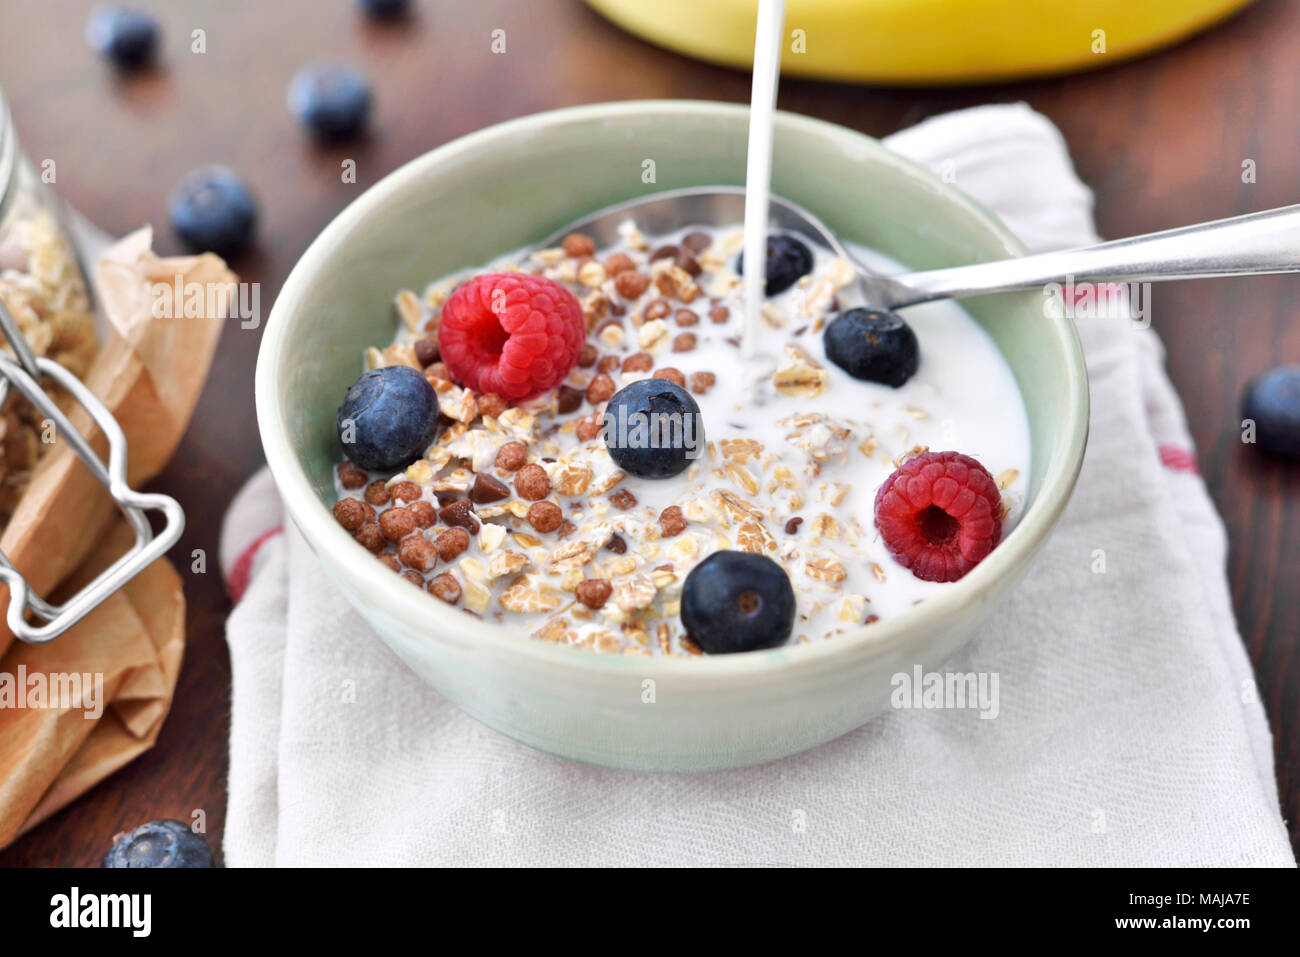 Cereals in a bowl, breakfast scene with fresh fruits and muesli, healthy eating. Breakfast bowl on a wooden table, rustic scene. Stock Photo